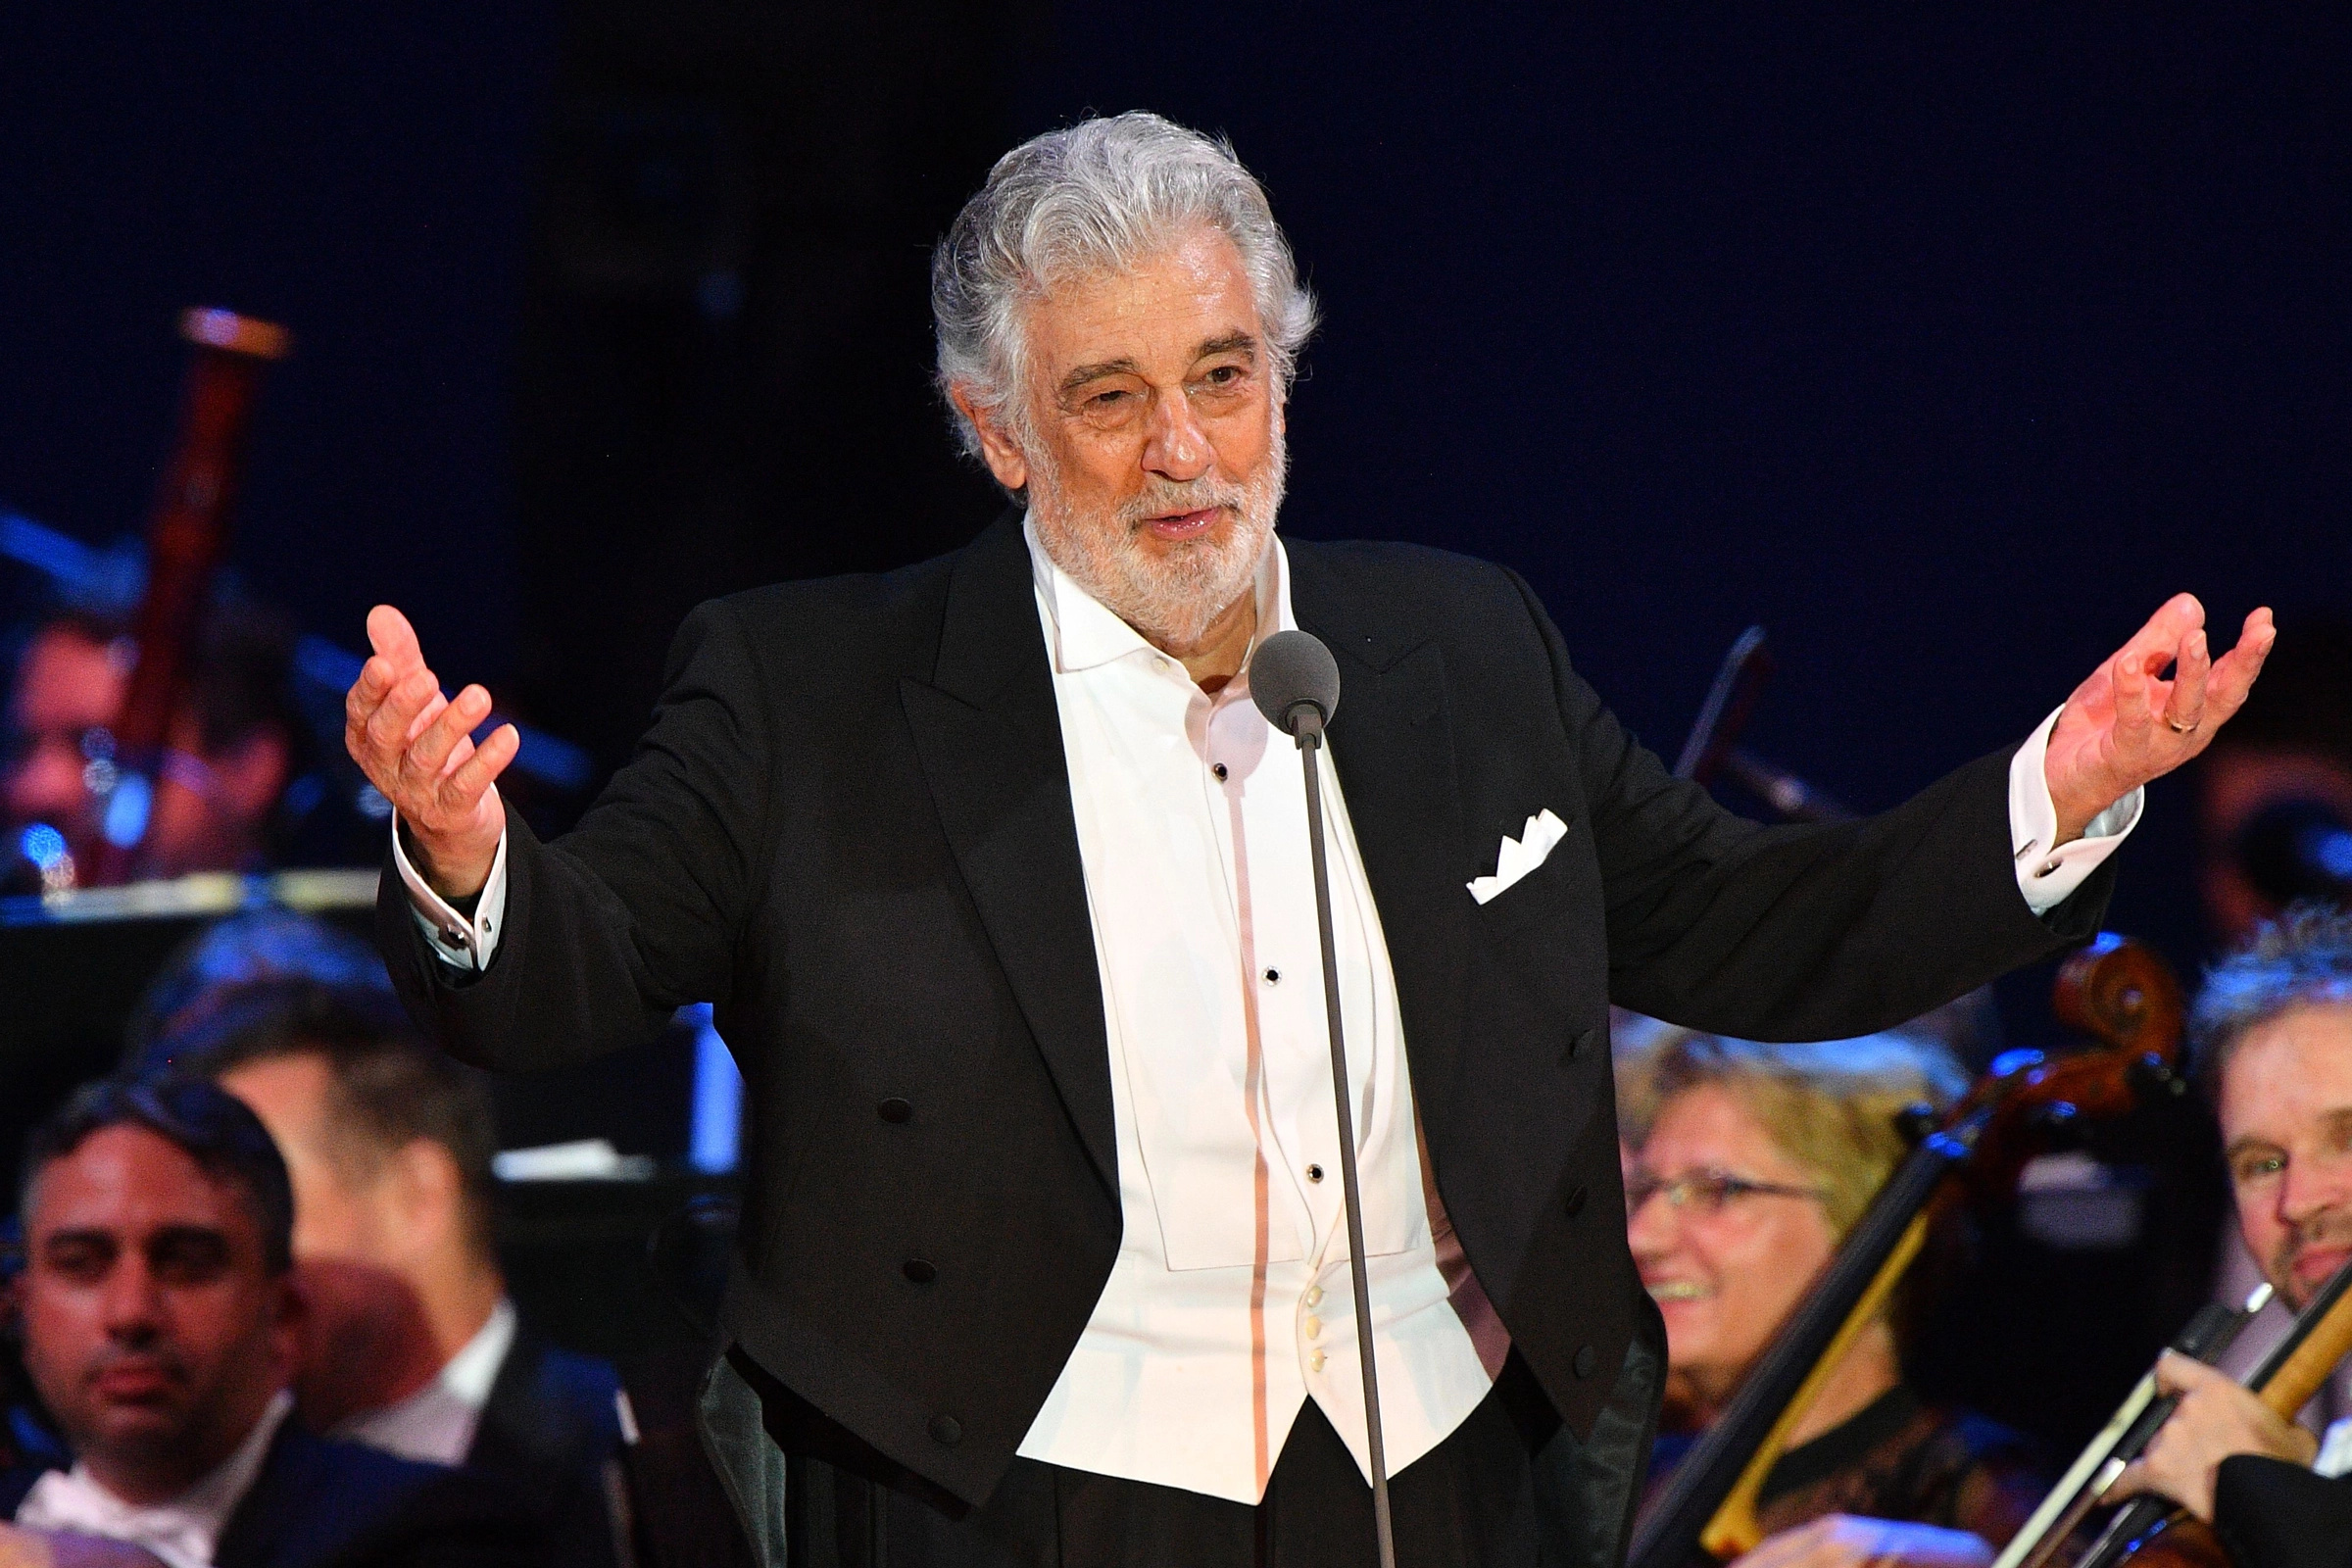 Placido Domingo, Additional accusers, Sexual harassment claims, Revelations surface, 2400x1600 HD Desktop